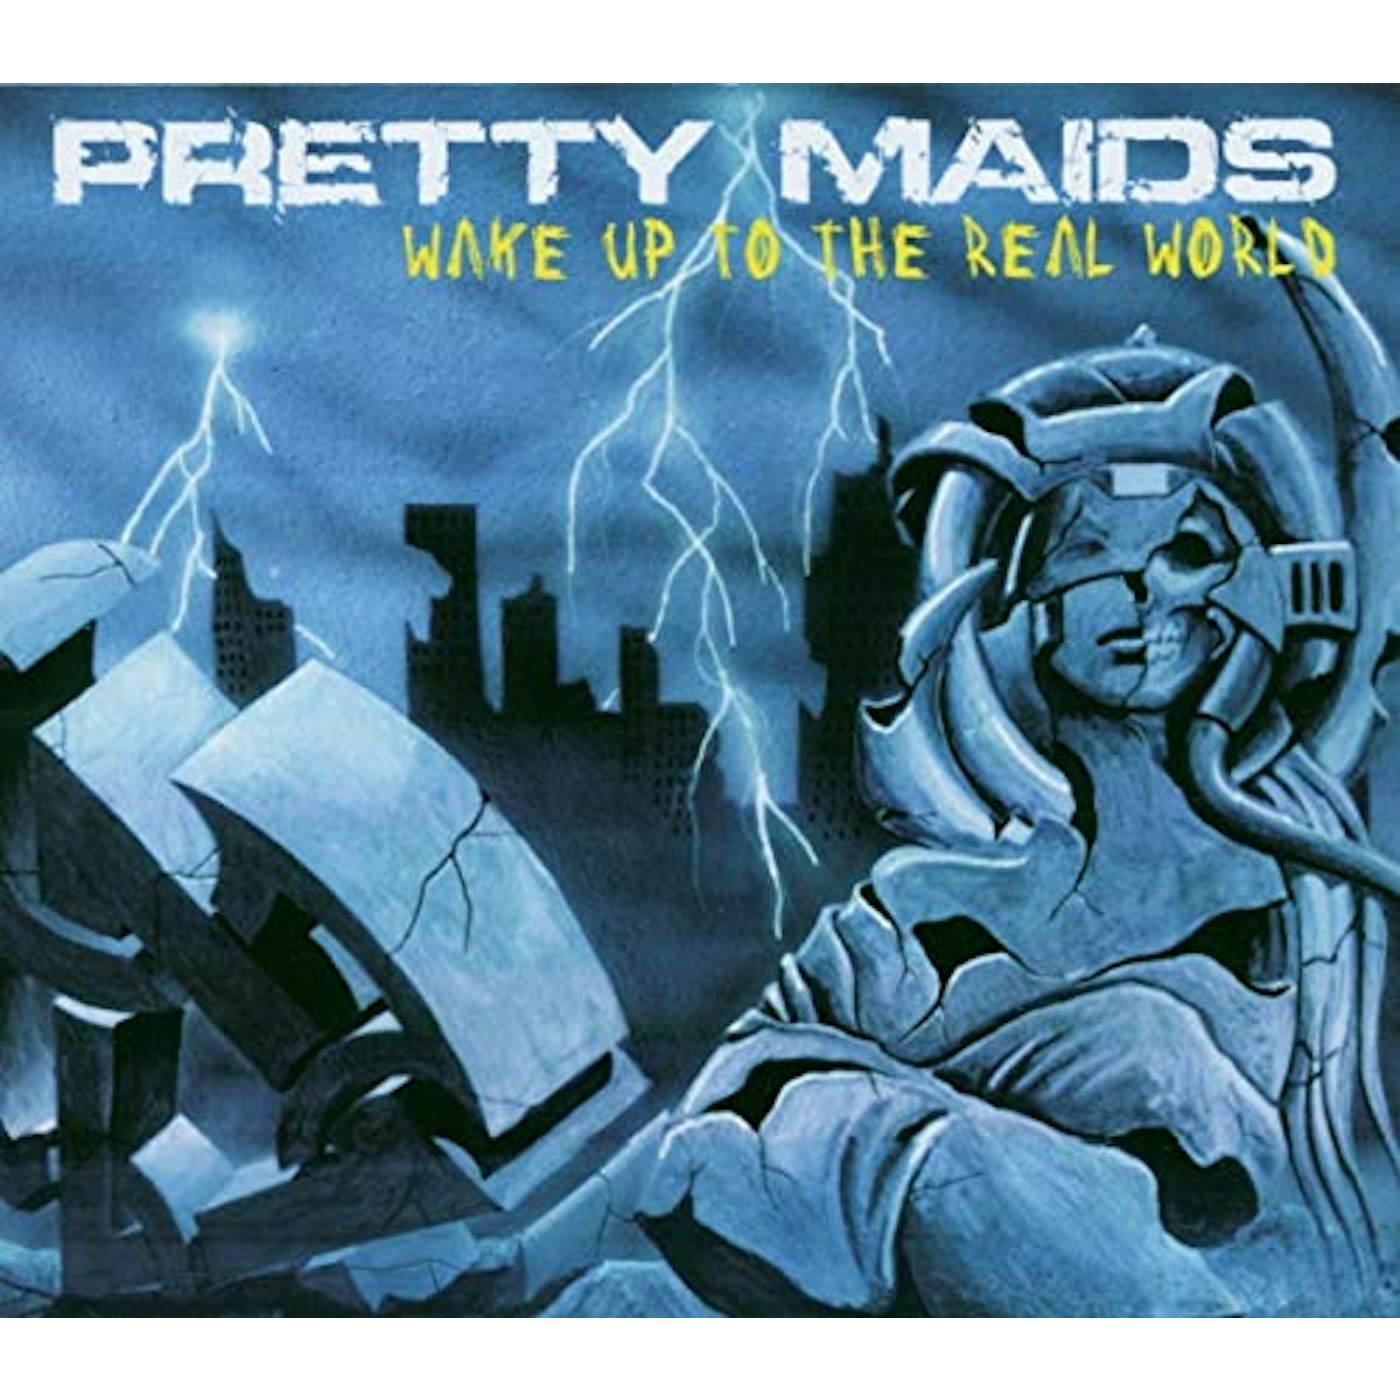 Pretty Maids Wake Up To The Real World Vinyl Record